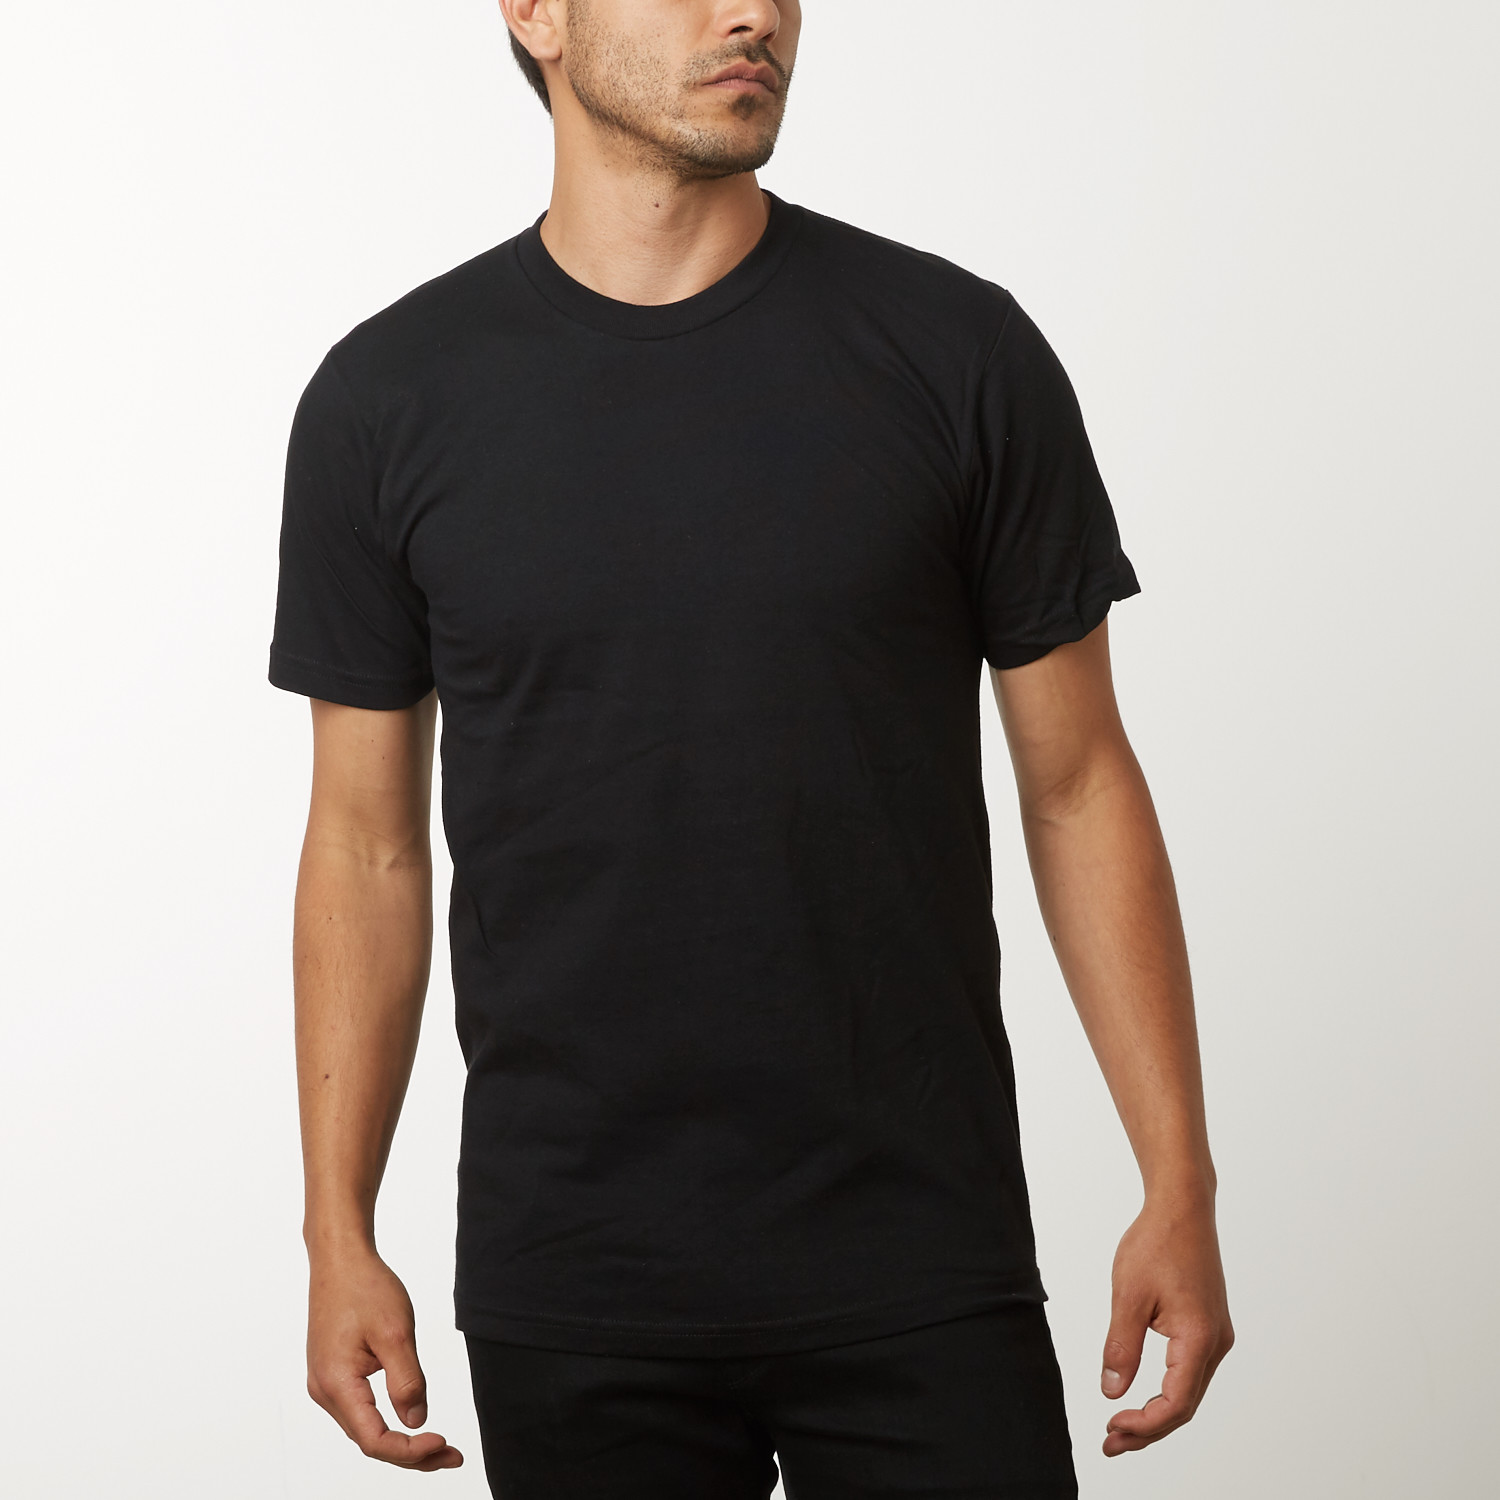 blank-t-shirt-black-s-supreme-new-york-touch-of-modern